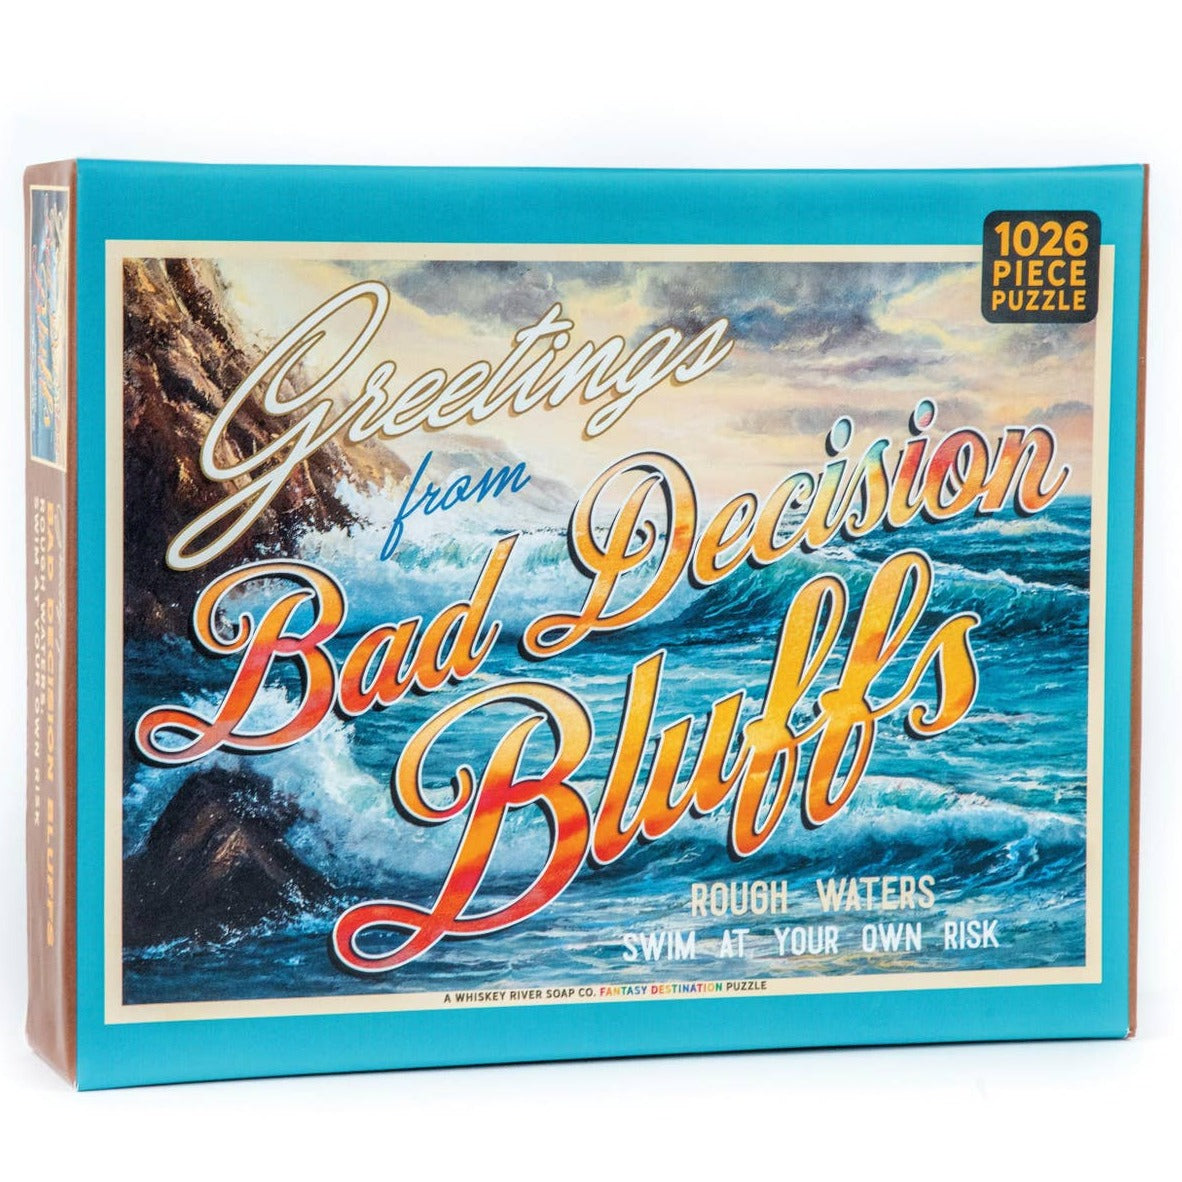 Greetings from Bad Decision Bluffs | 1,026 Piece Jigsaw Puzzle